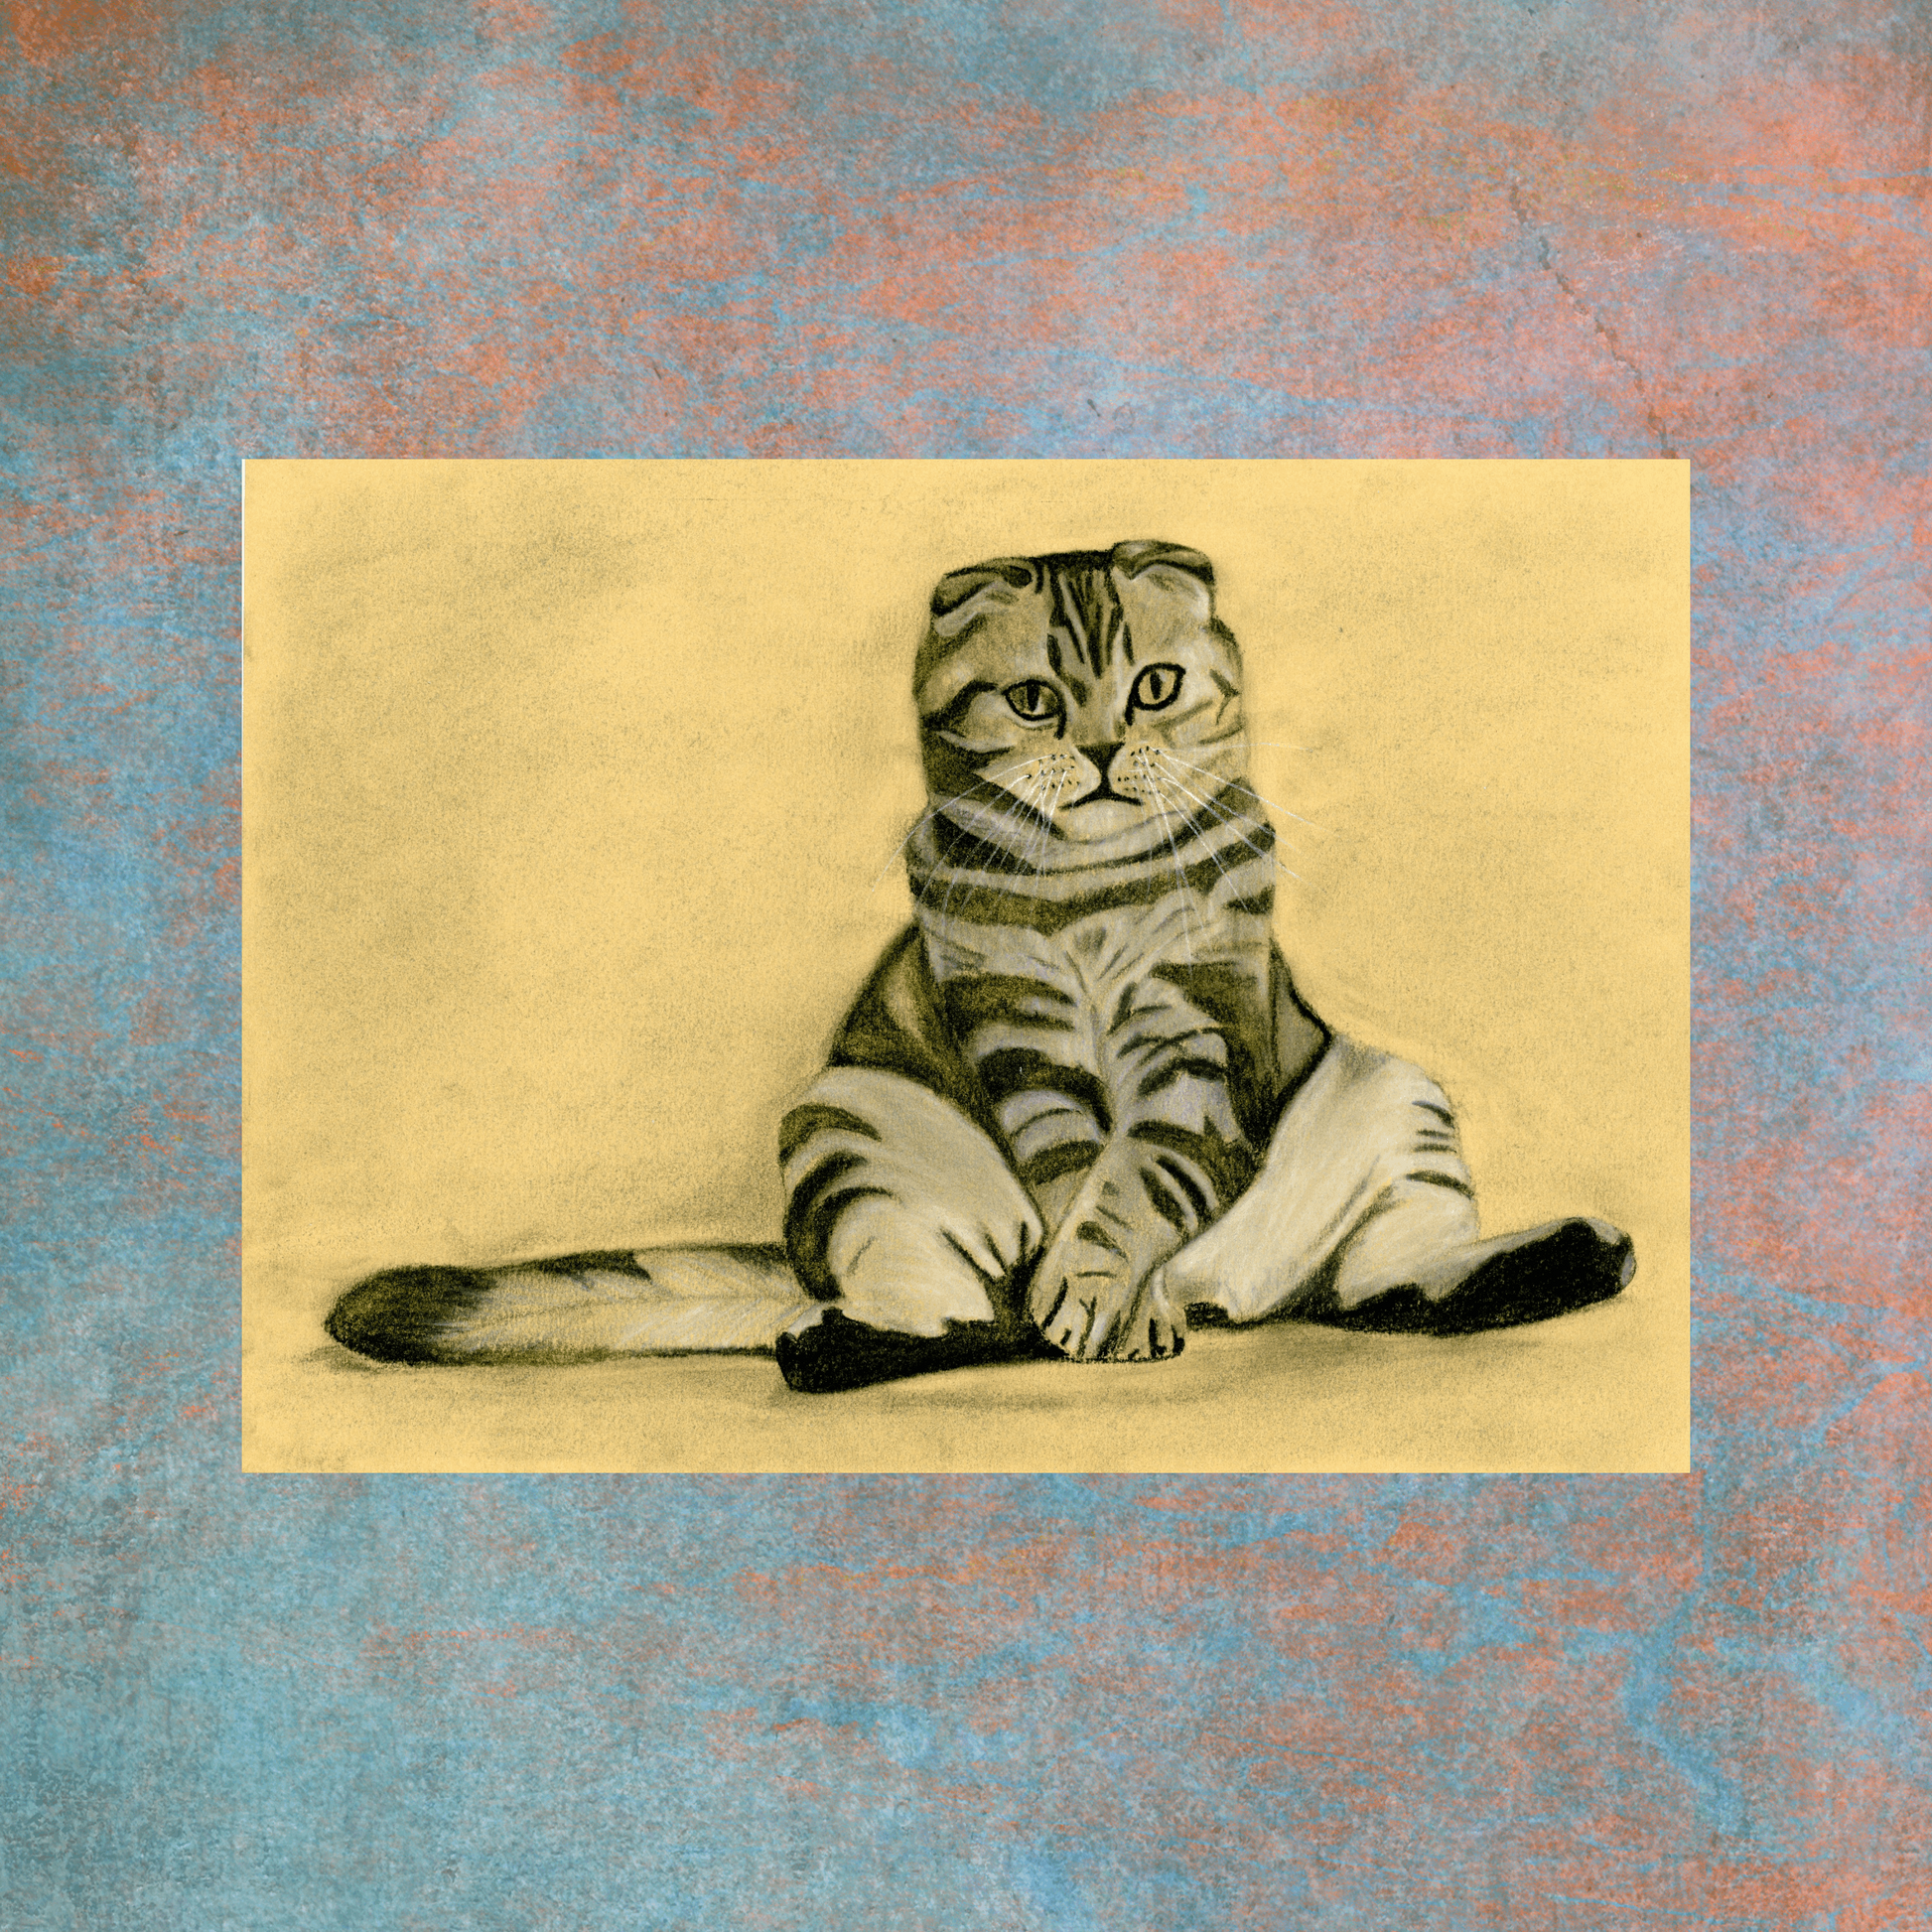 This Golden Cat Original Charcoal Art features a remarkable charcoal drawing with stunning metallic pigments.